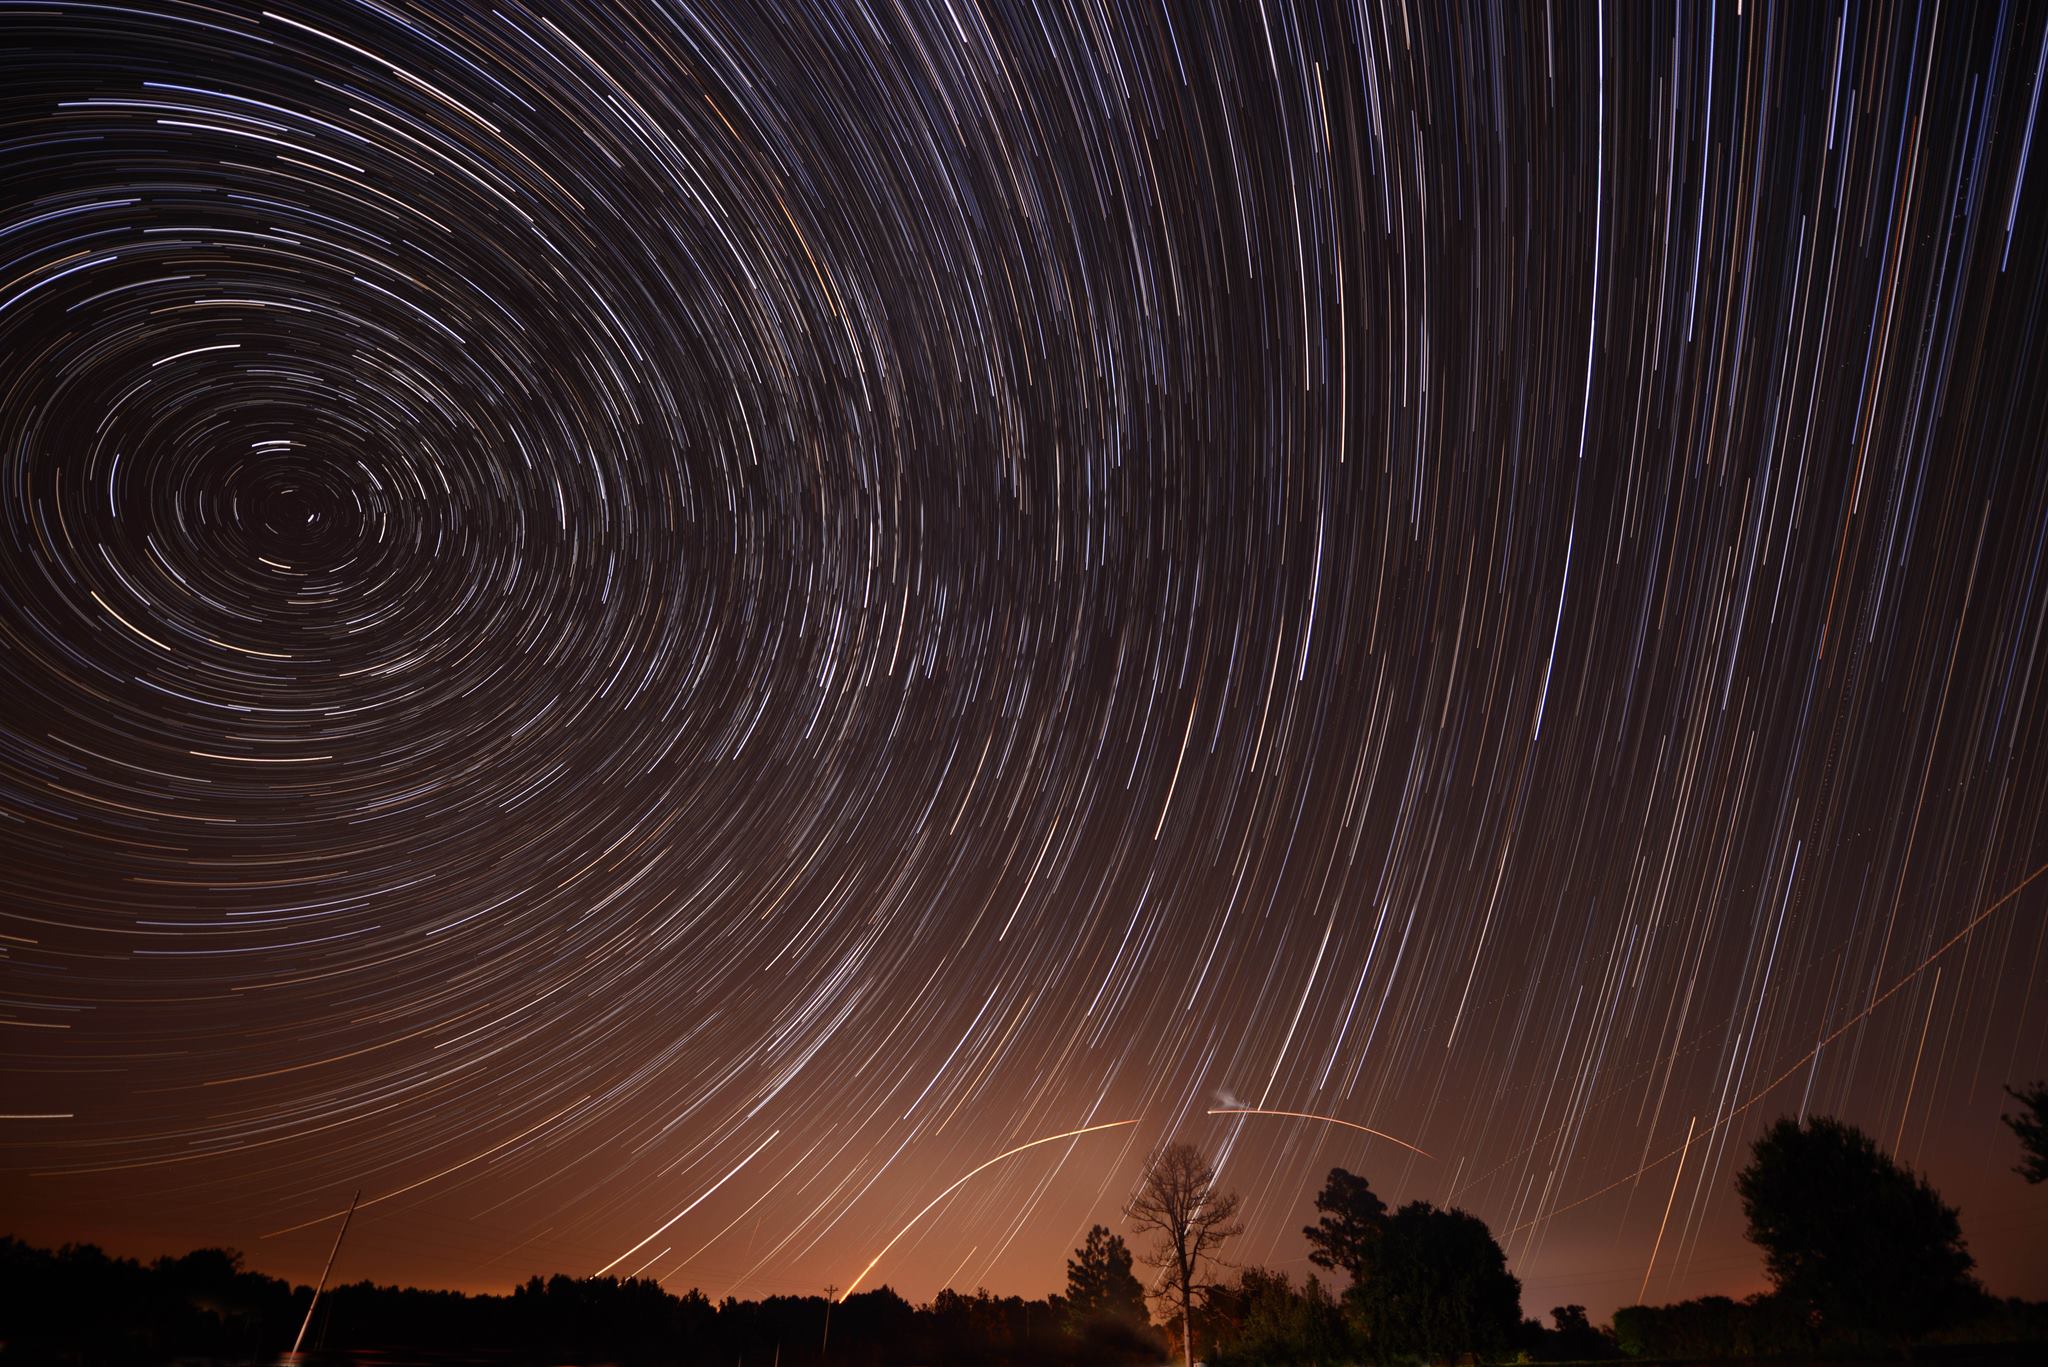 View larger. | Here is the entire startrail image made by Ken Christison. It incorporates the LADEE launch last night ((also see photo above). 183 images stacked with startrails.exe. Shot with the Nikon D800 with 14-24 wide angle lens at 14mm, f/2.8, ISO 400, 30 sec. exposures.